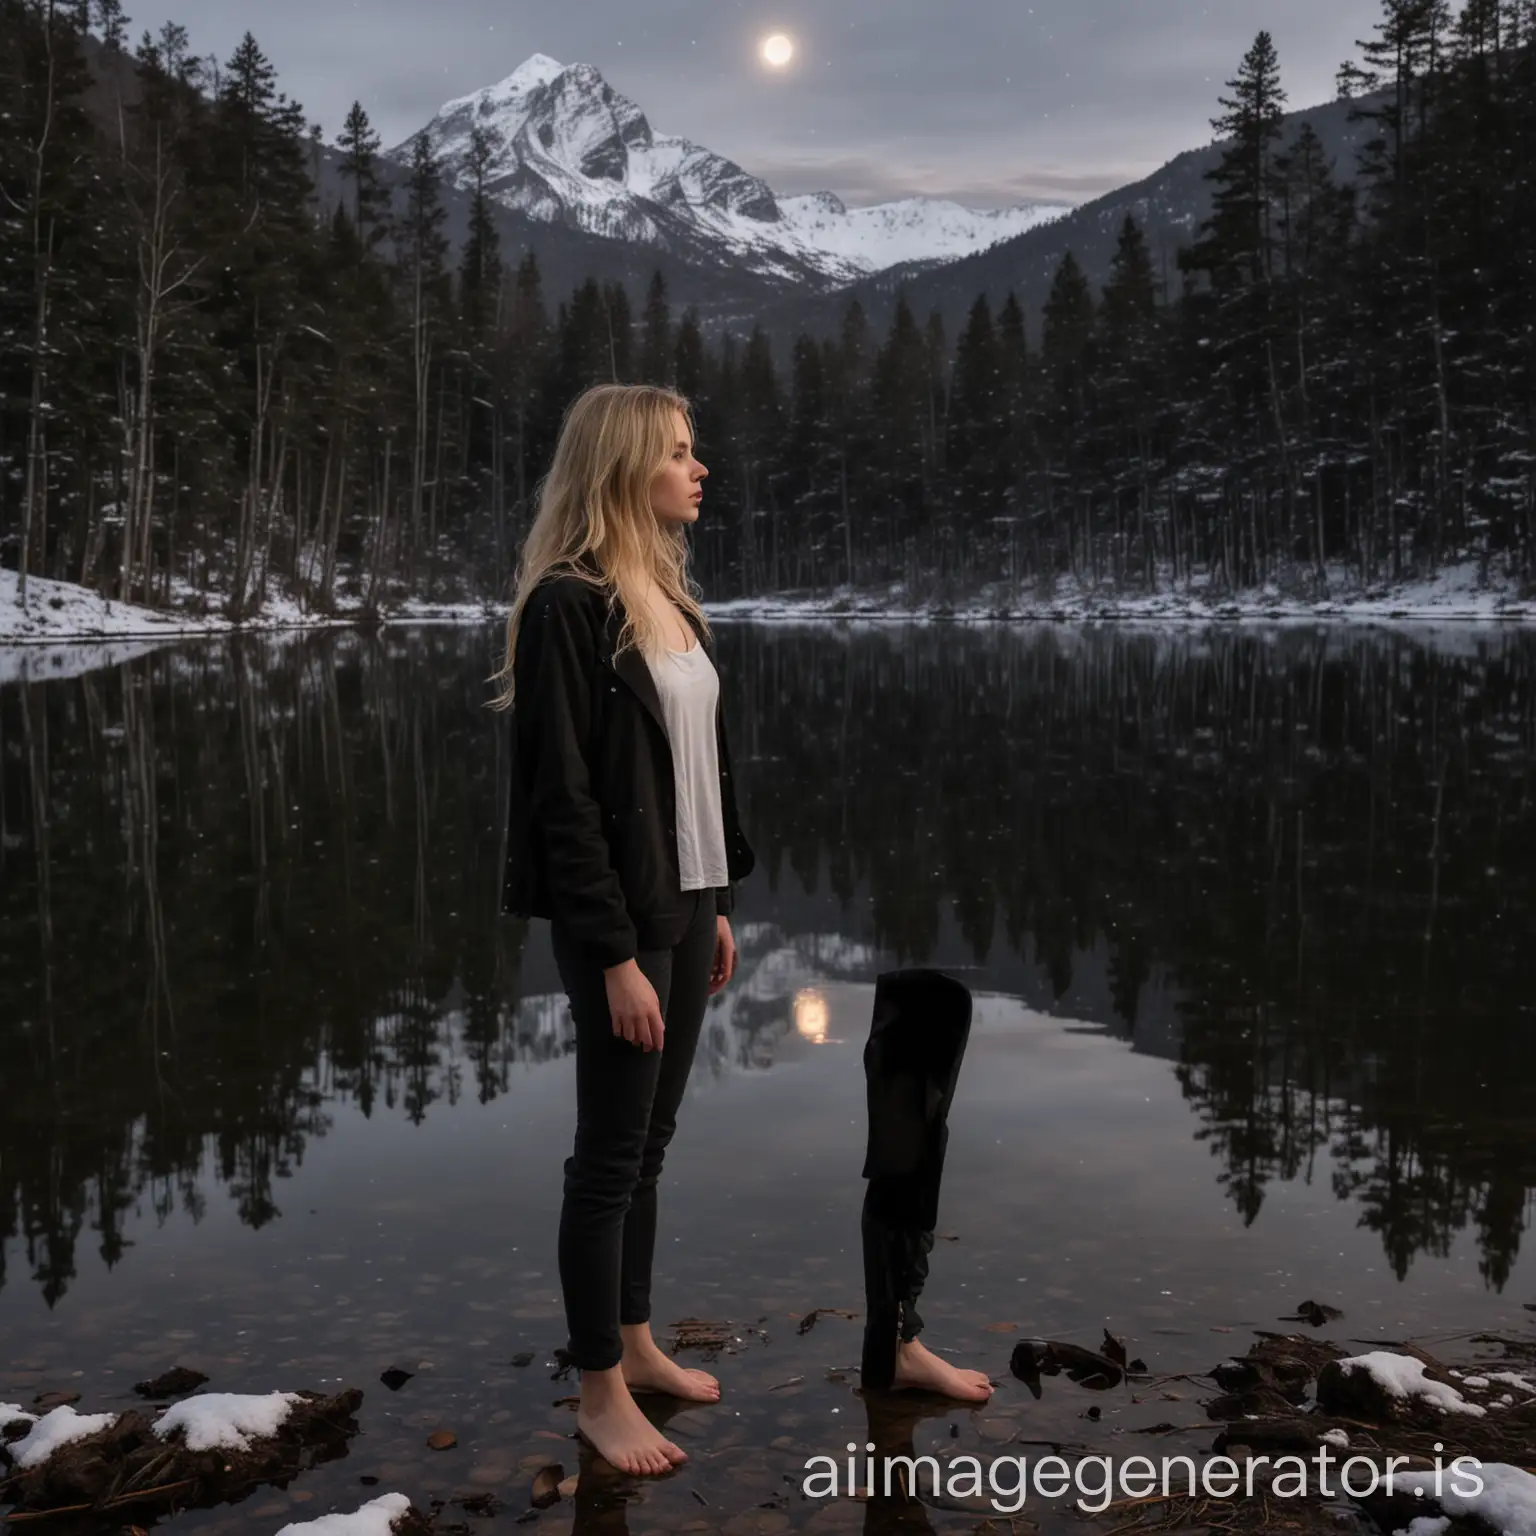 a young girl of 19 years old, blonde, barefoot, who wears black pants and a black jacket, stands in front of a lake in a dark forest, during a full moon night. A snowy mountain is in the background.